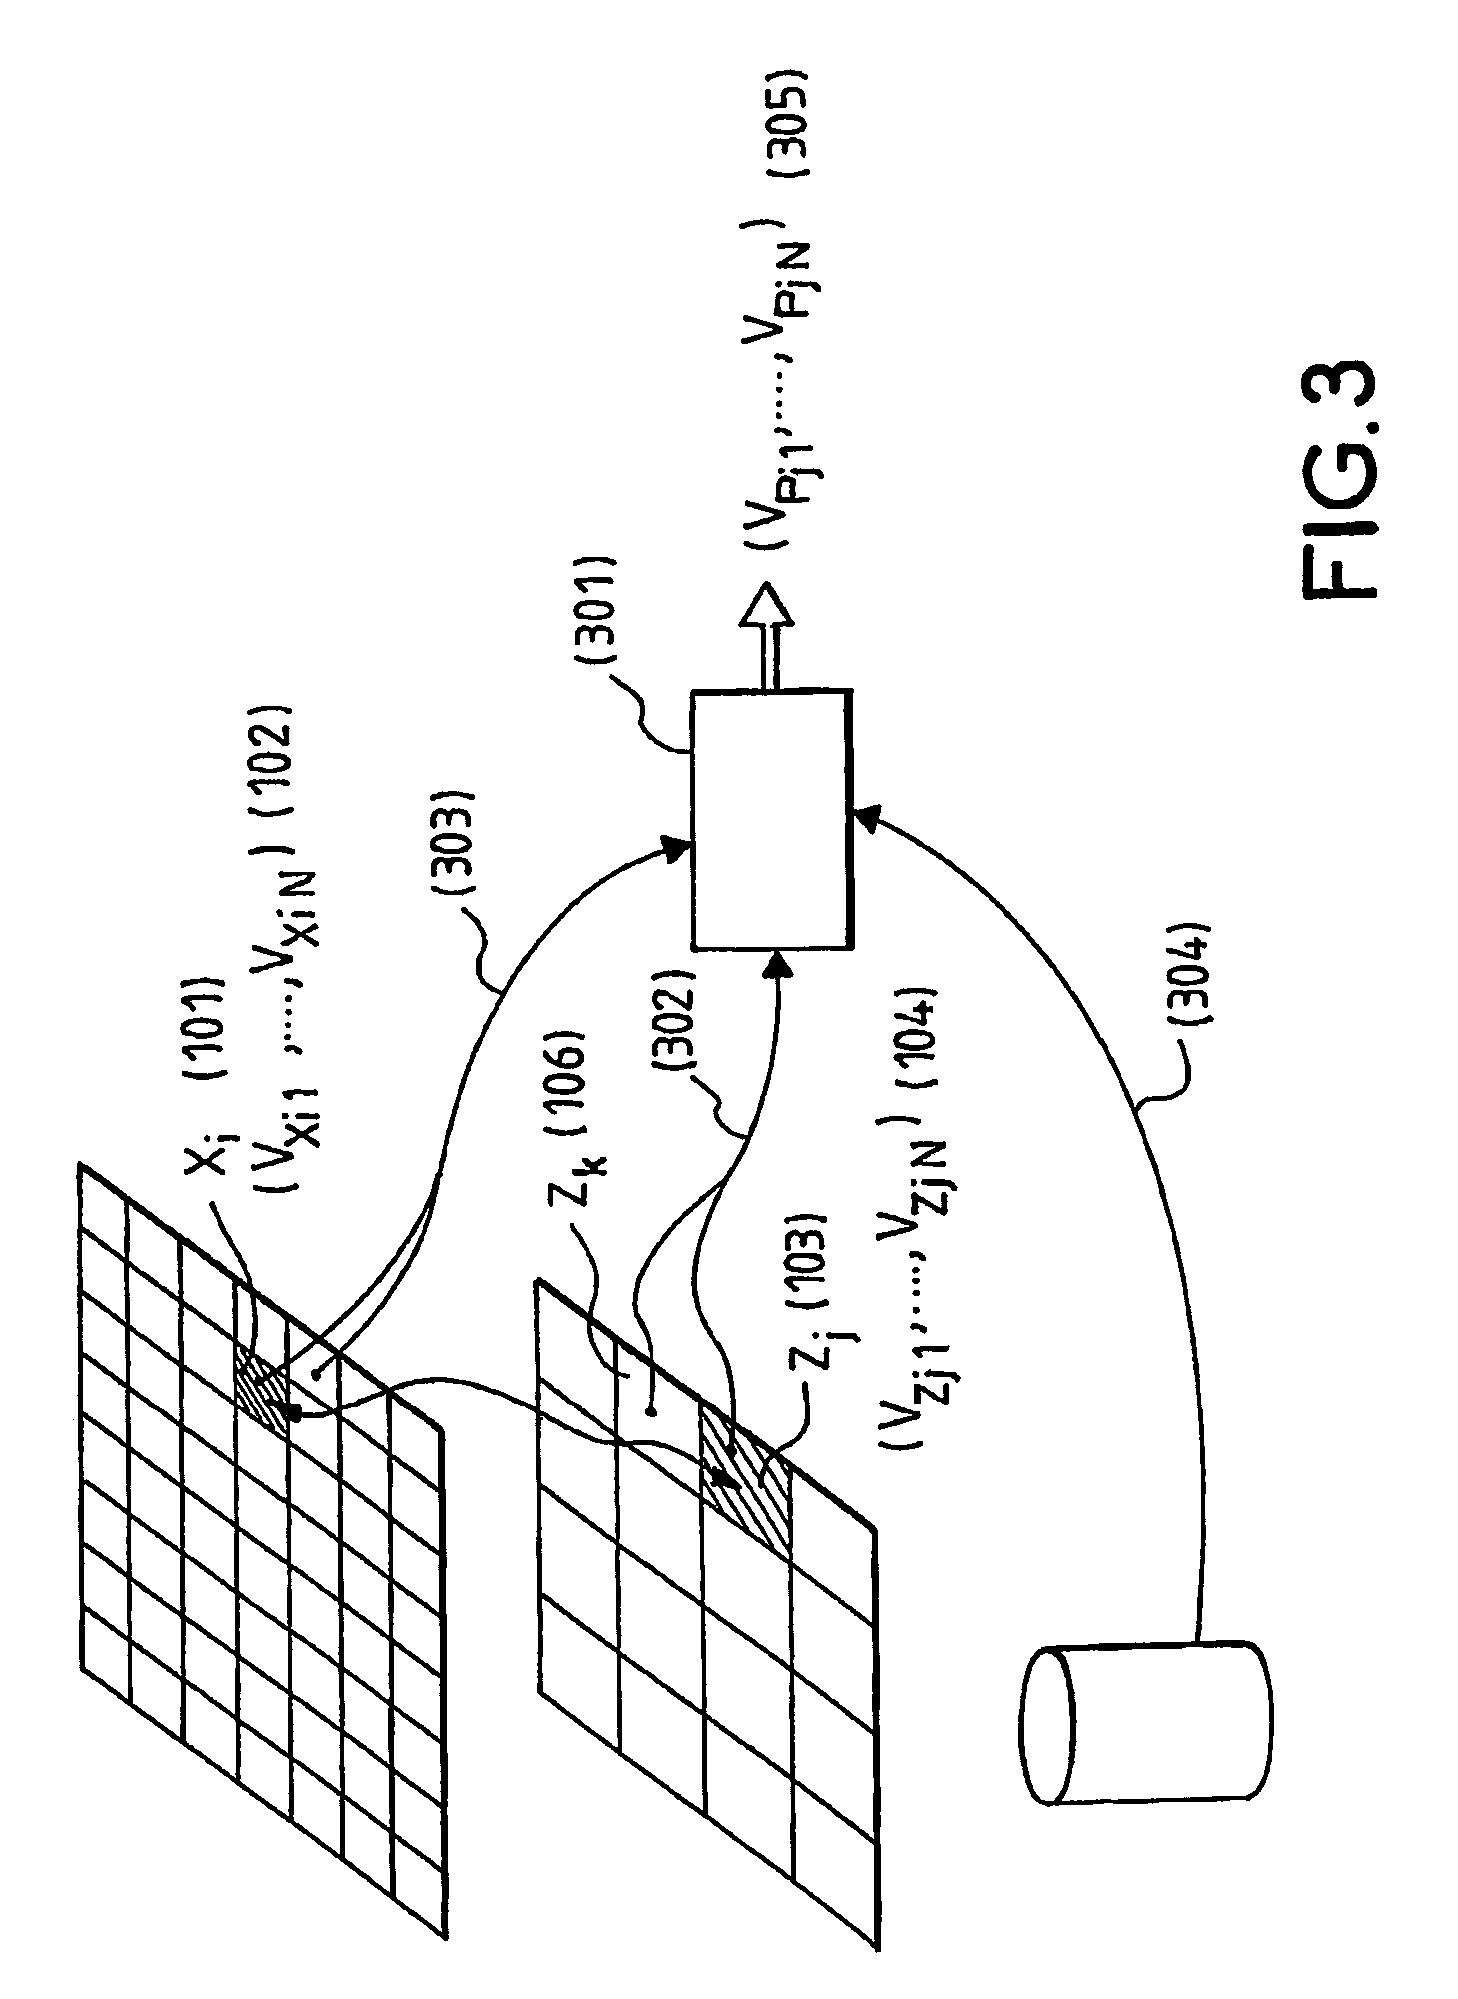 Method and system for differentially and regularly modifying a digital image by pixel